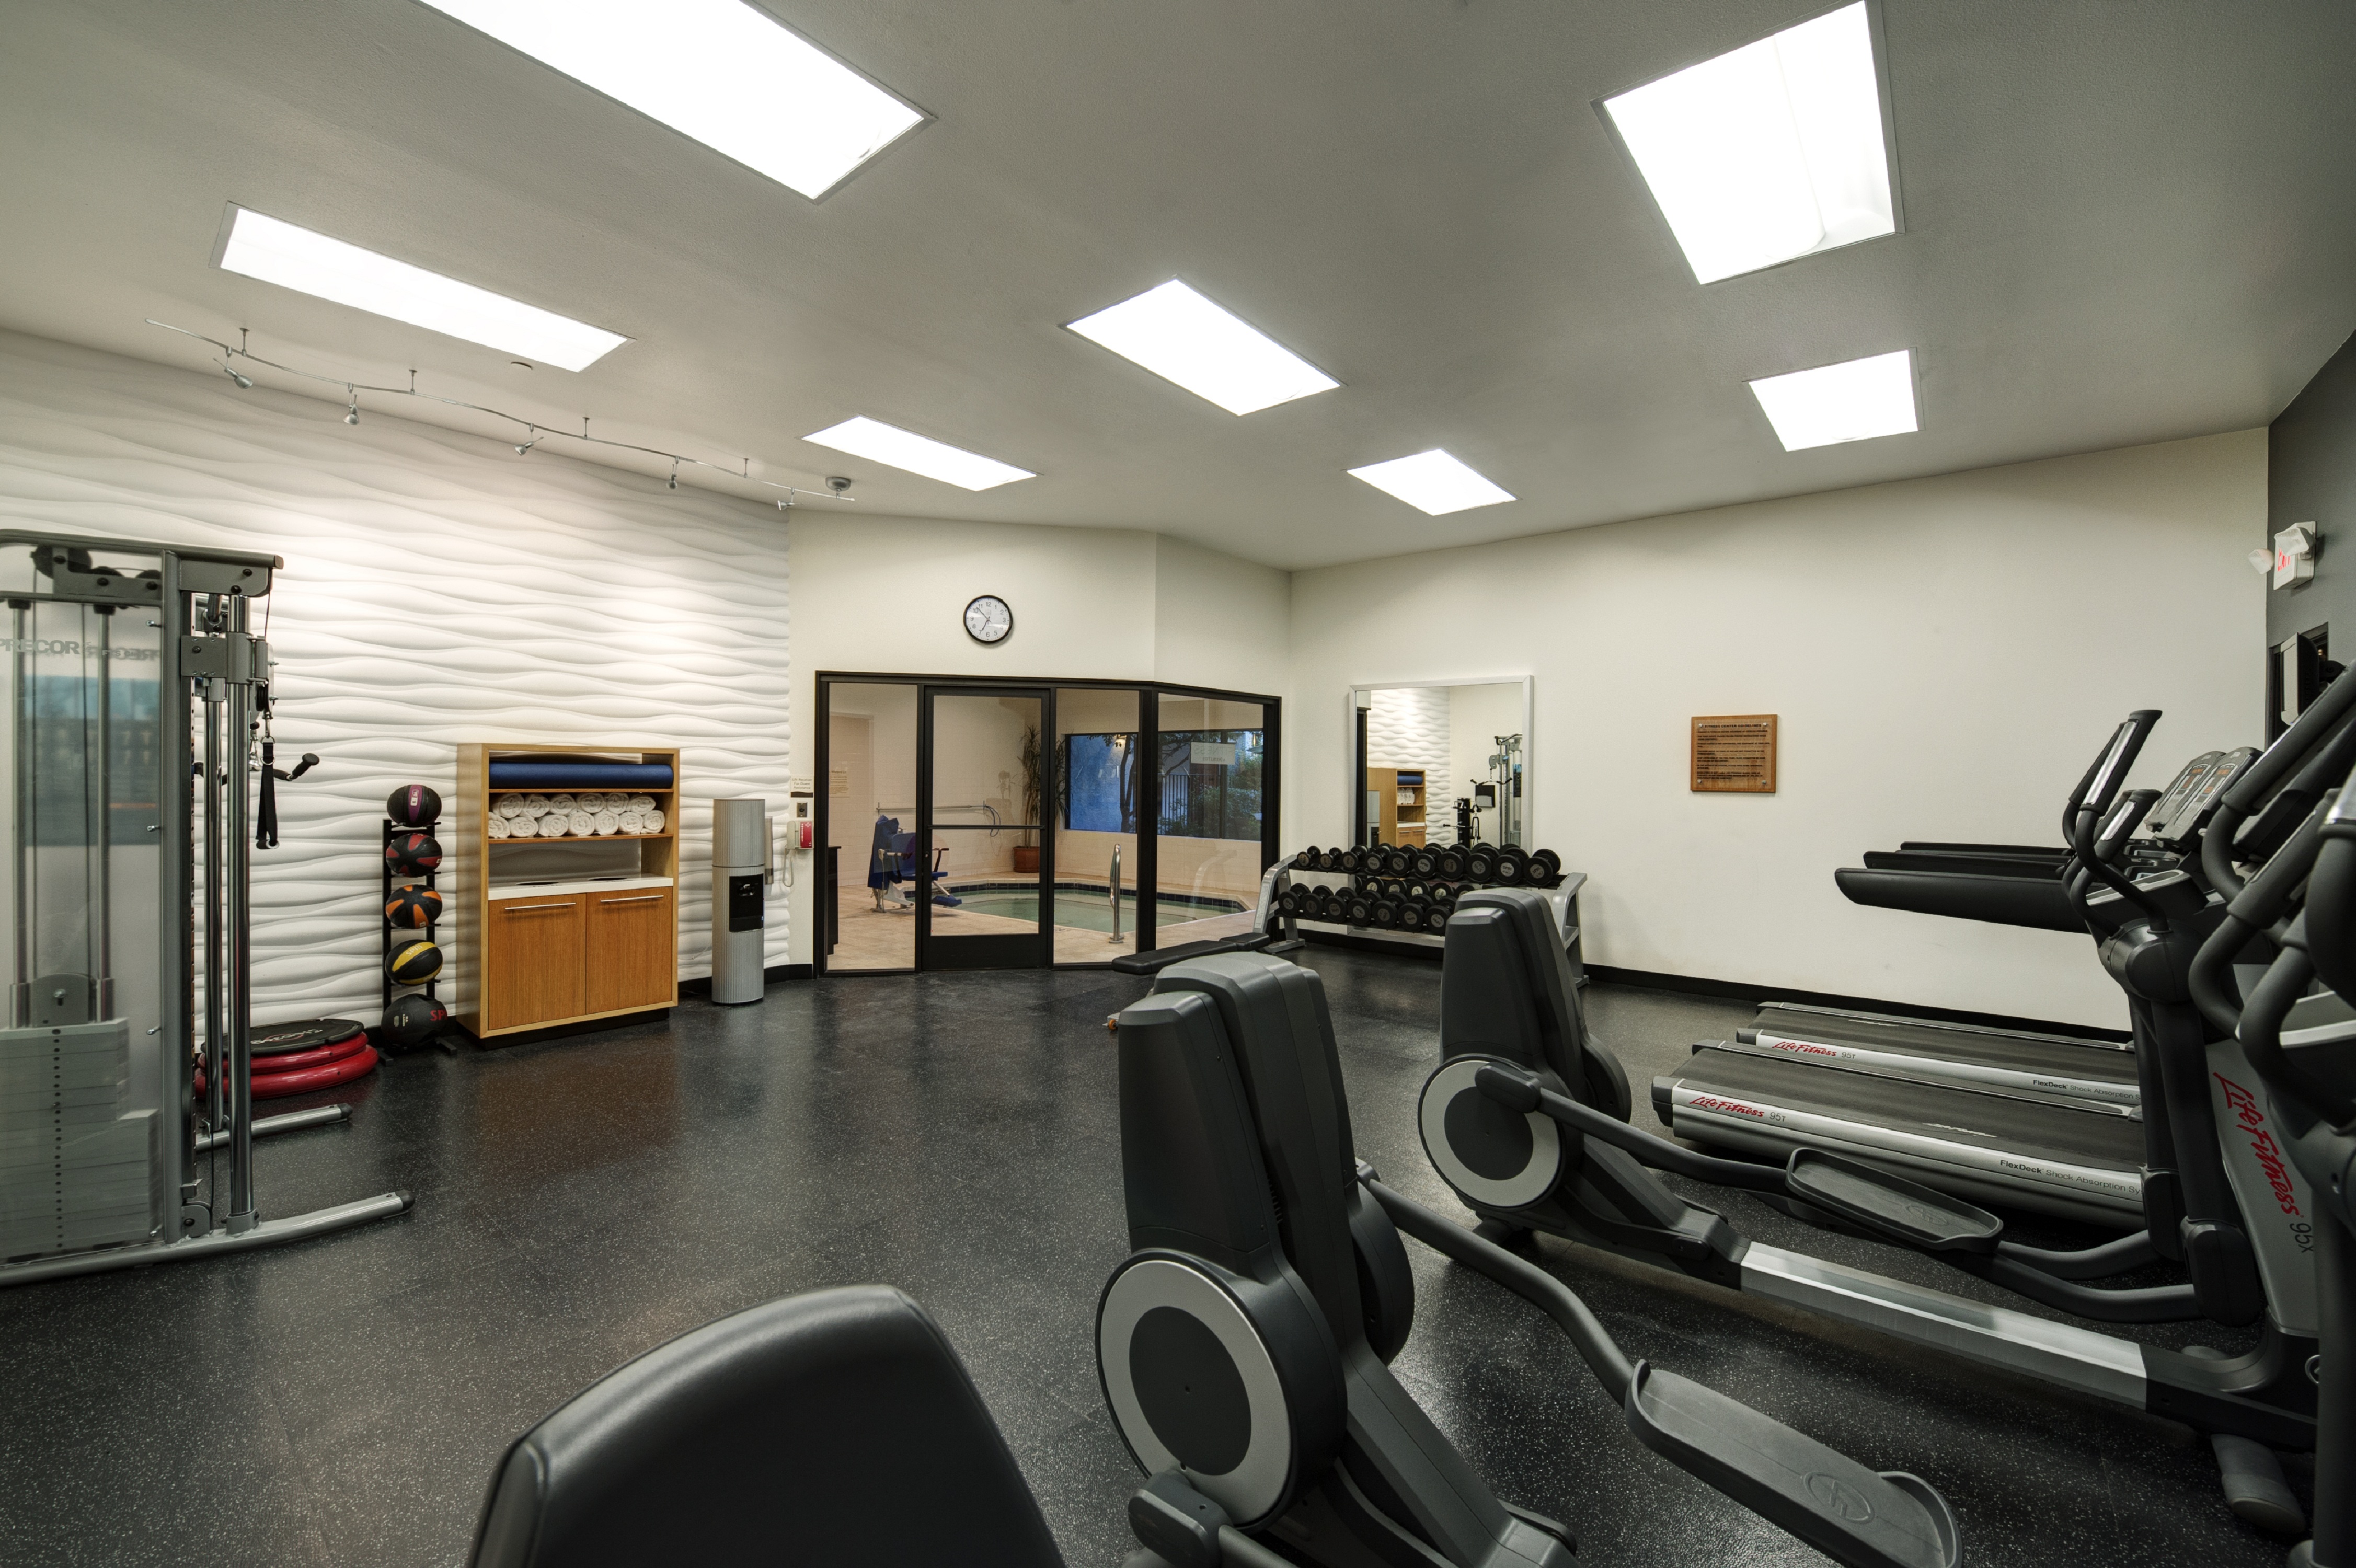 Fitness Center With Cardio Equipment, Weight Machine, Exercise Stepper, Weight Balls, Towel Station, Water Cooler, Wall Clock Above Glass Door With View of Hot Tub, and Large Mirror by Free Weight